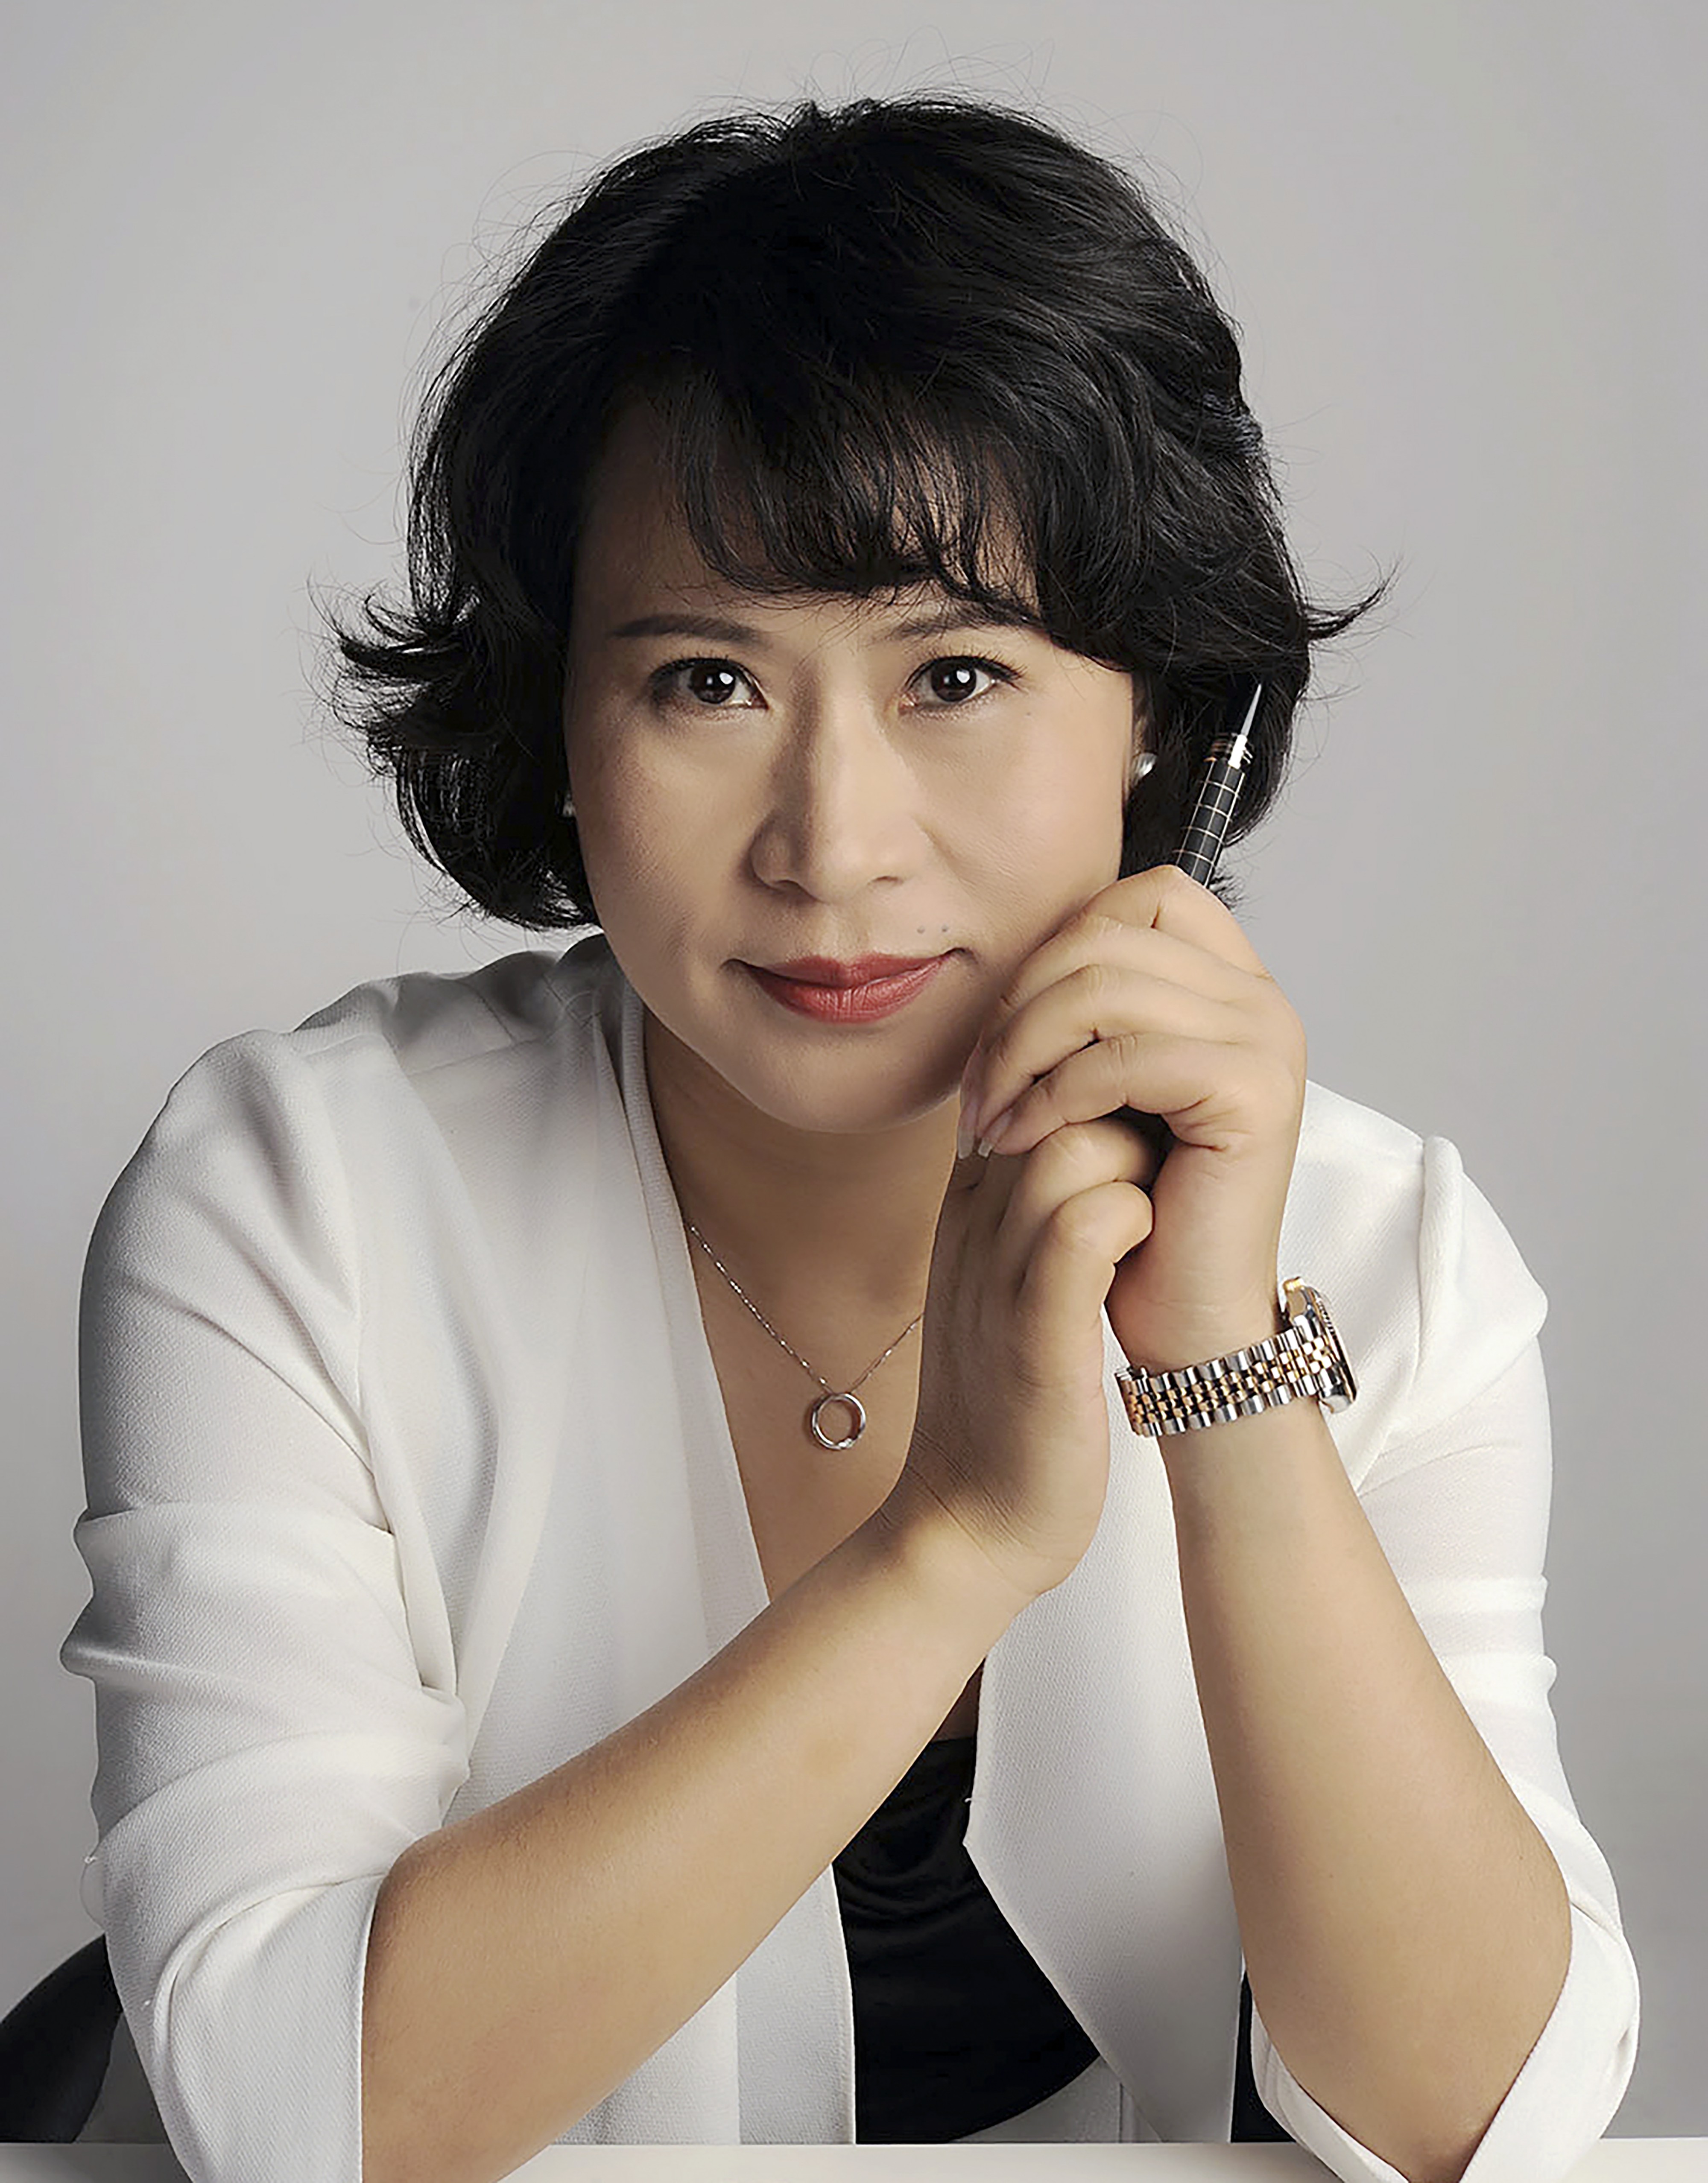 Xie Ping, co-founder and president of Yinghan Assets Photo: SCMP handout